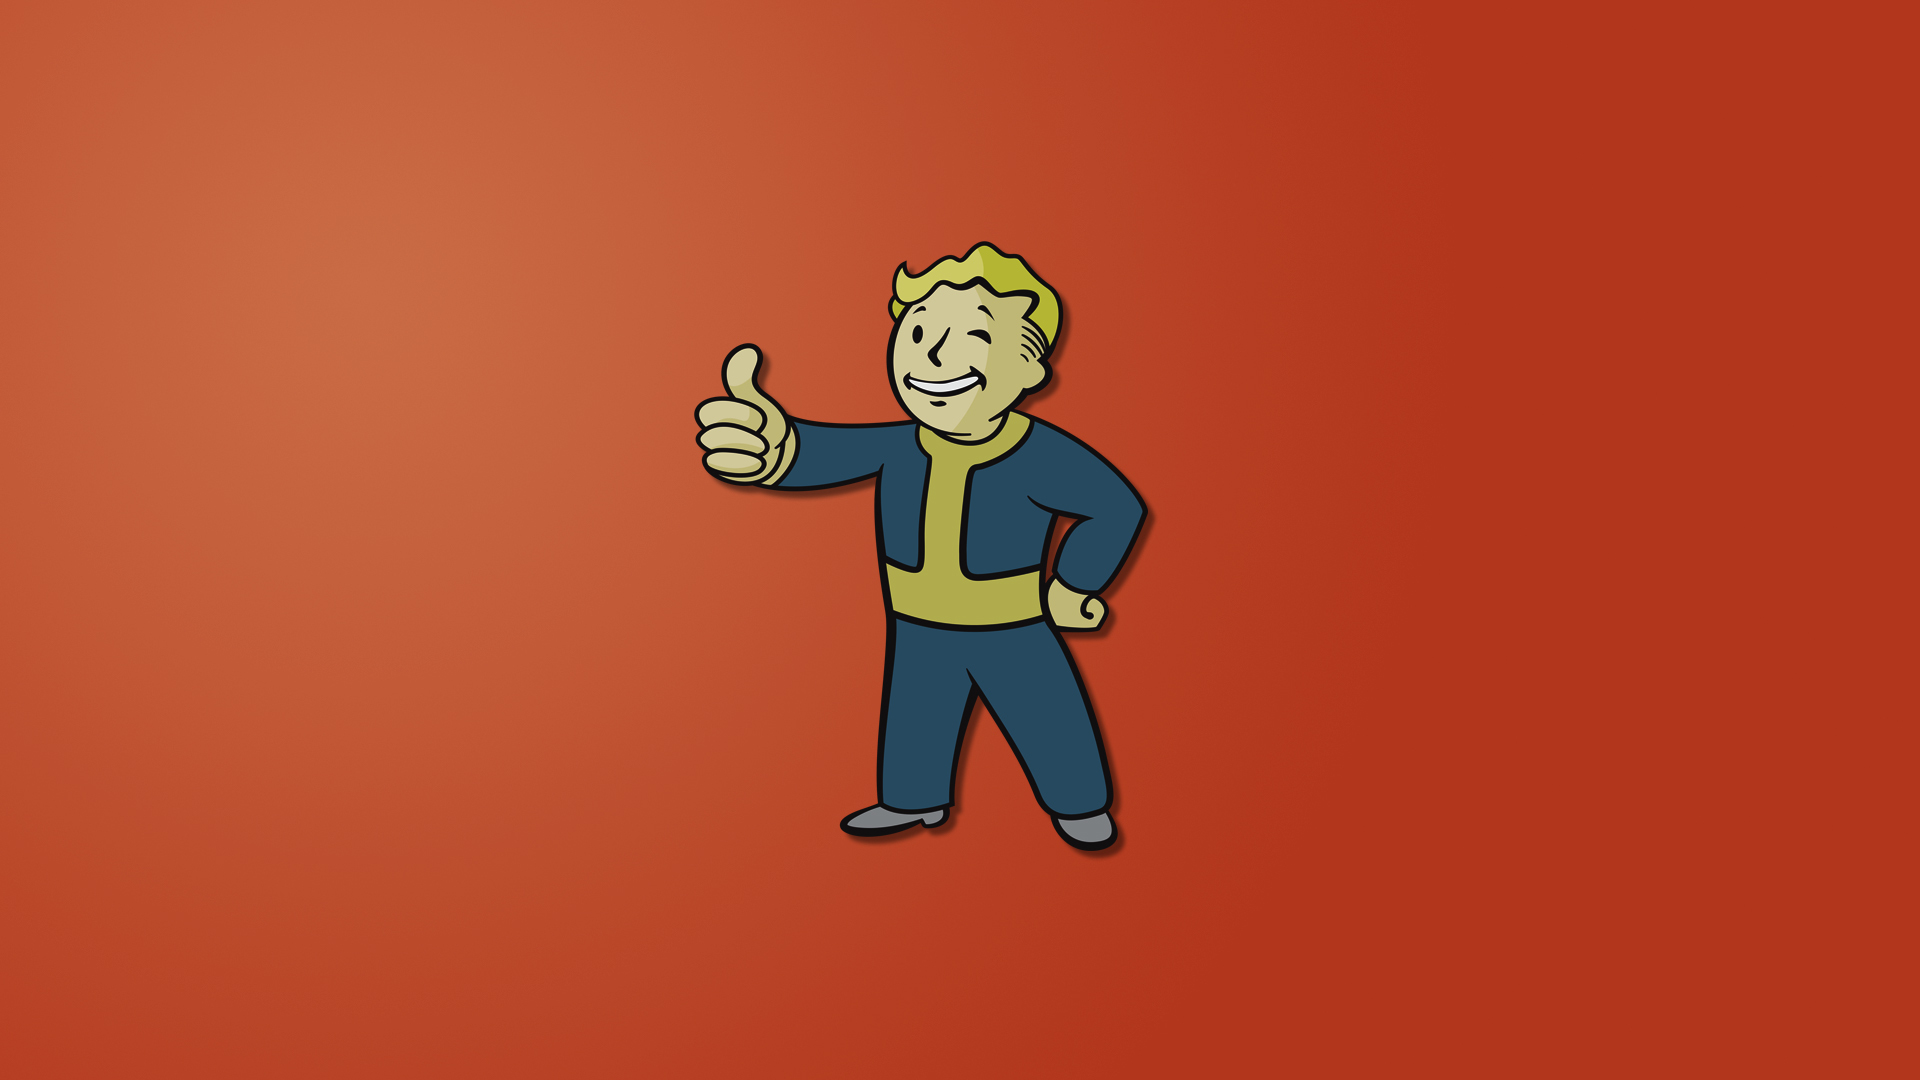 Fallout Vault Boy Fallout 3 Wallpaper Hd Games 4k Wallpapers Images Photos And Background Wallpapers Den